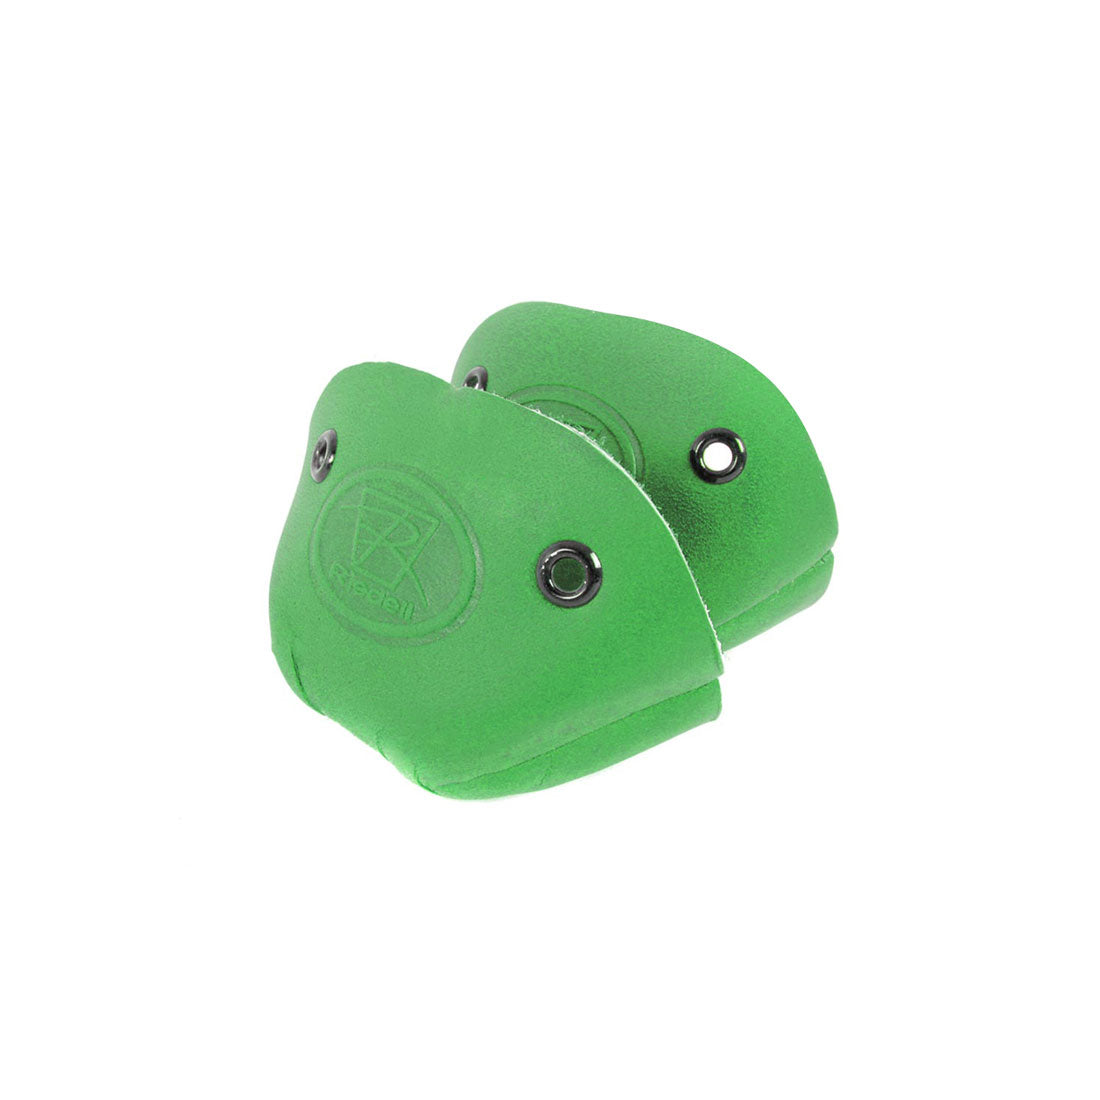 Riedell Toe Cap 2pk - Leather Green Roller Skate Hardware and Parts